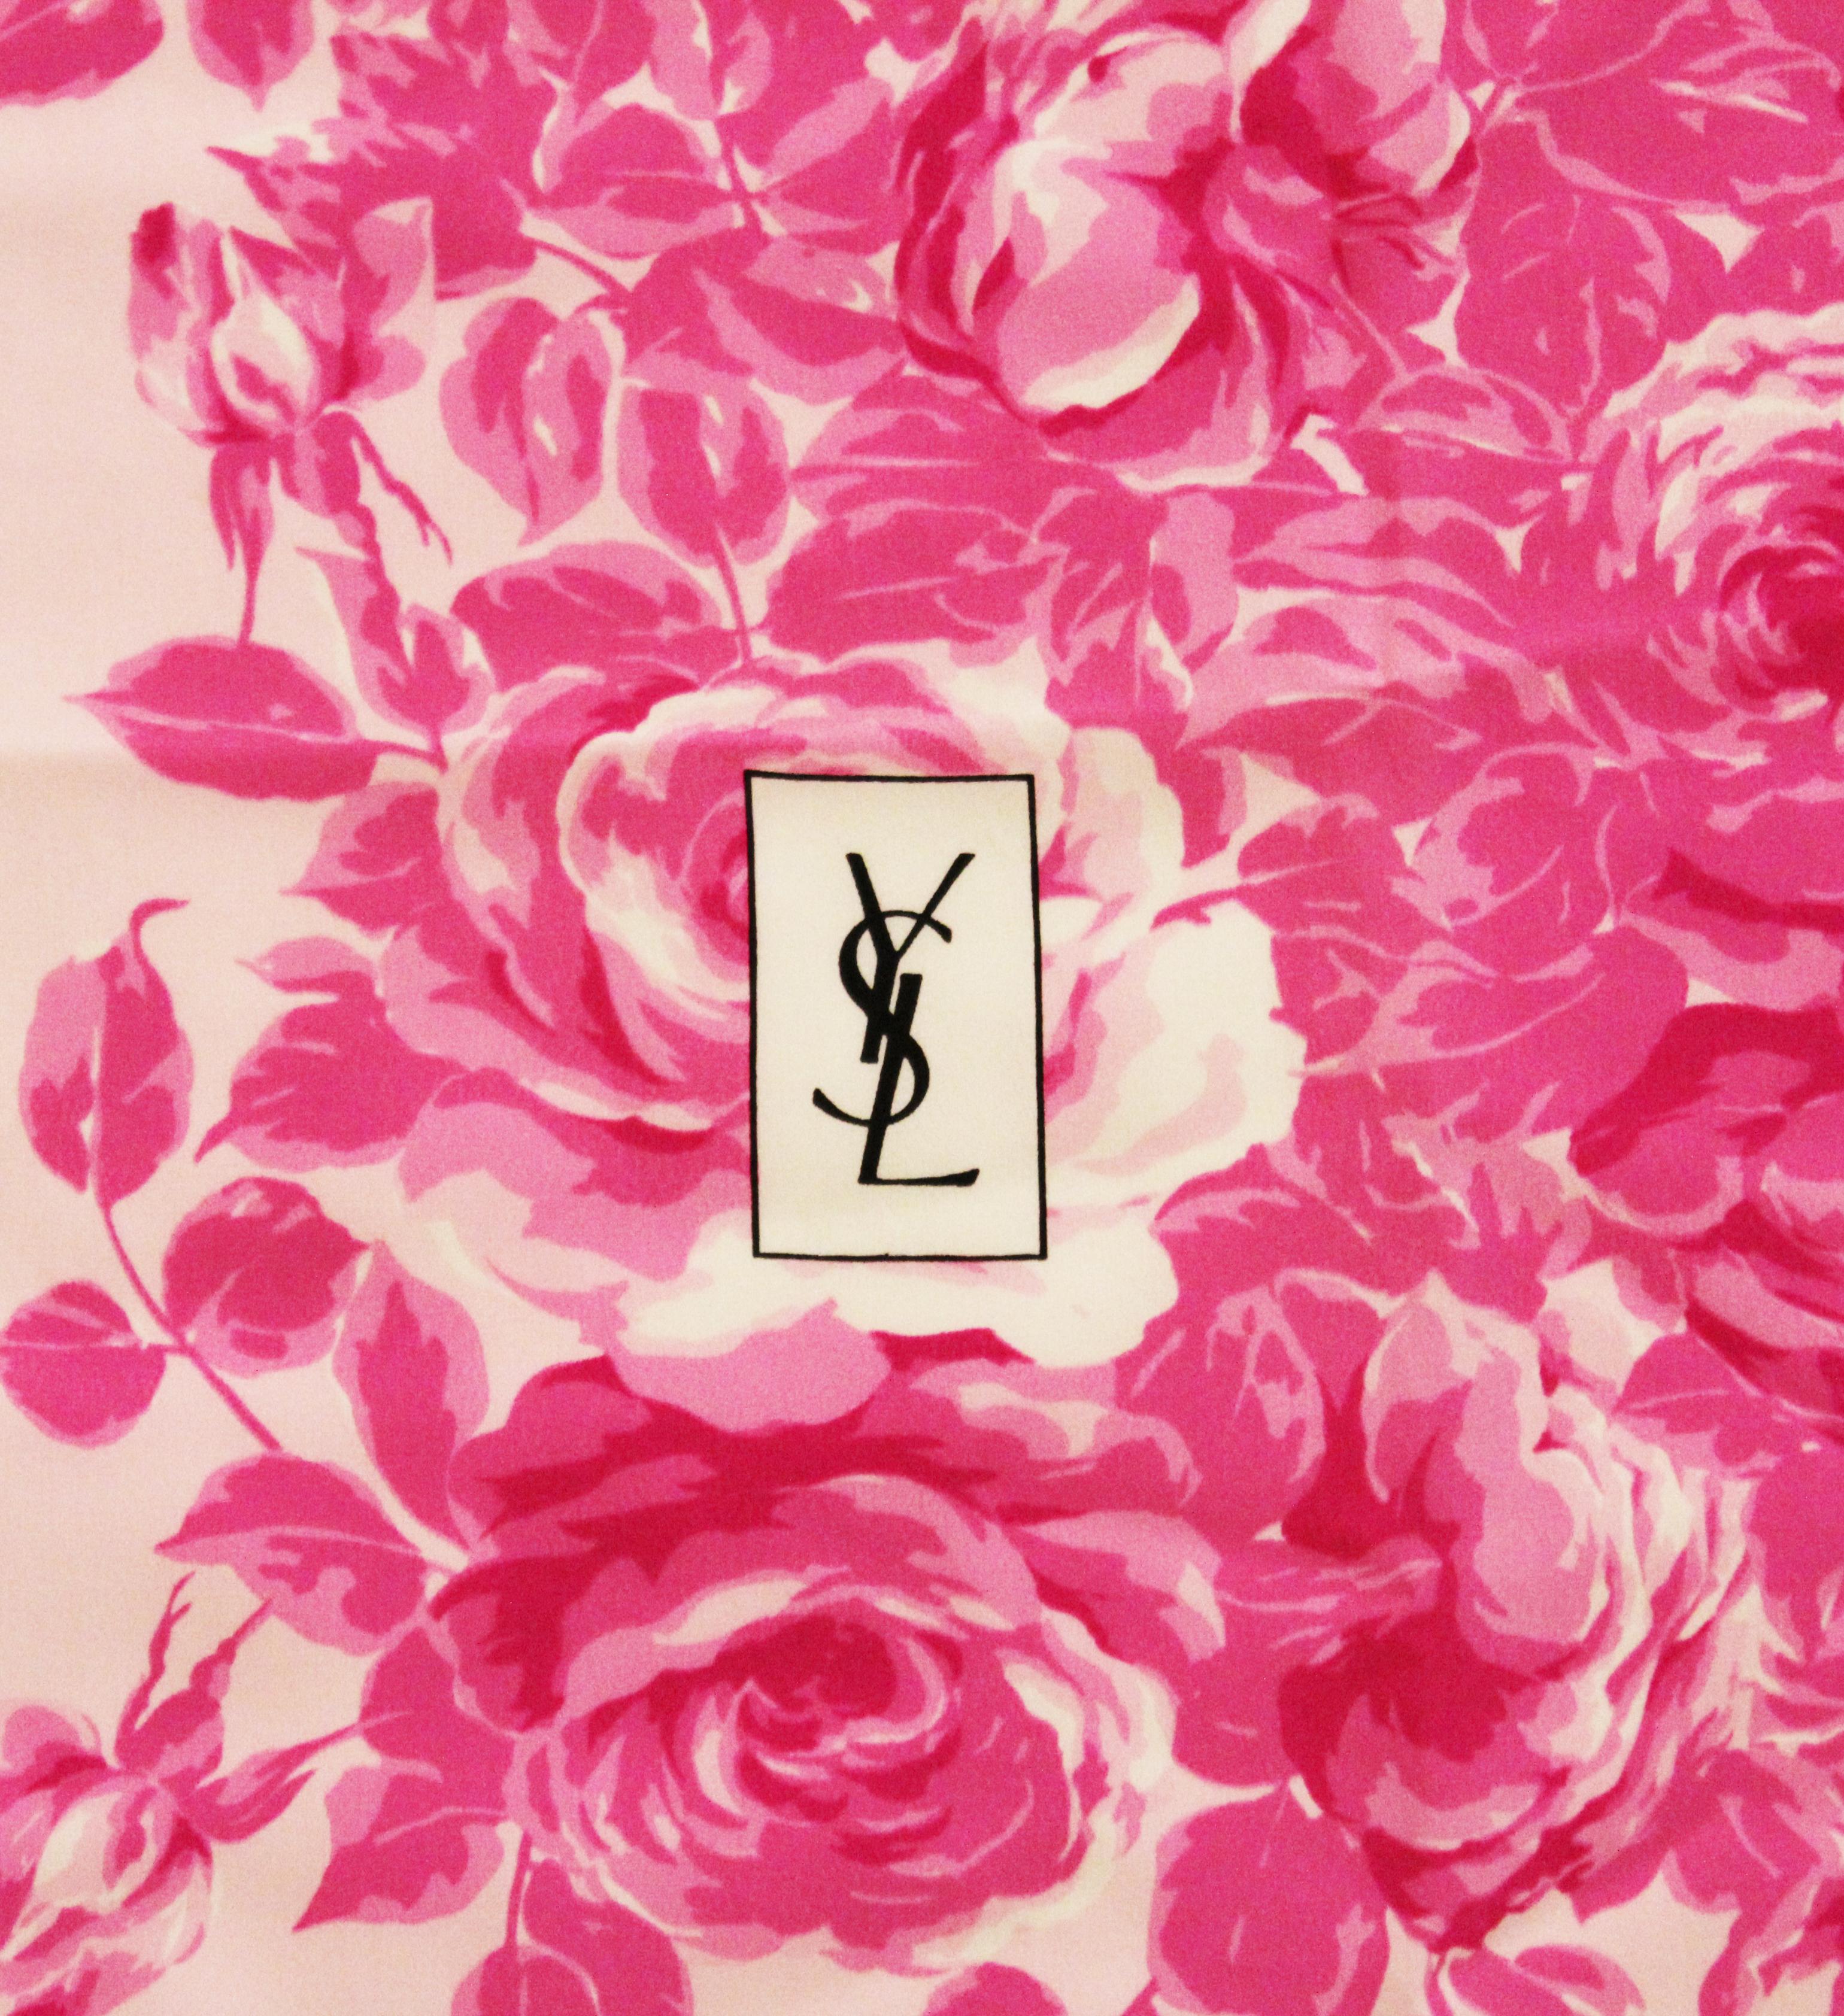 Yves Saint Laurent silk pink on pink rose scarf is brilliantly vibrant with the pale pink background and hot pink roses.  This lovely scarf has the YSL logo integrated into the scarf in black lettering.  This scarf in silk crepe de chine with hand